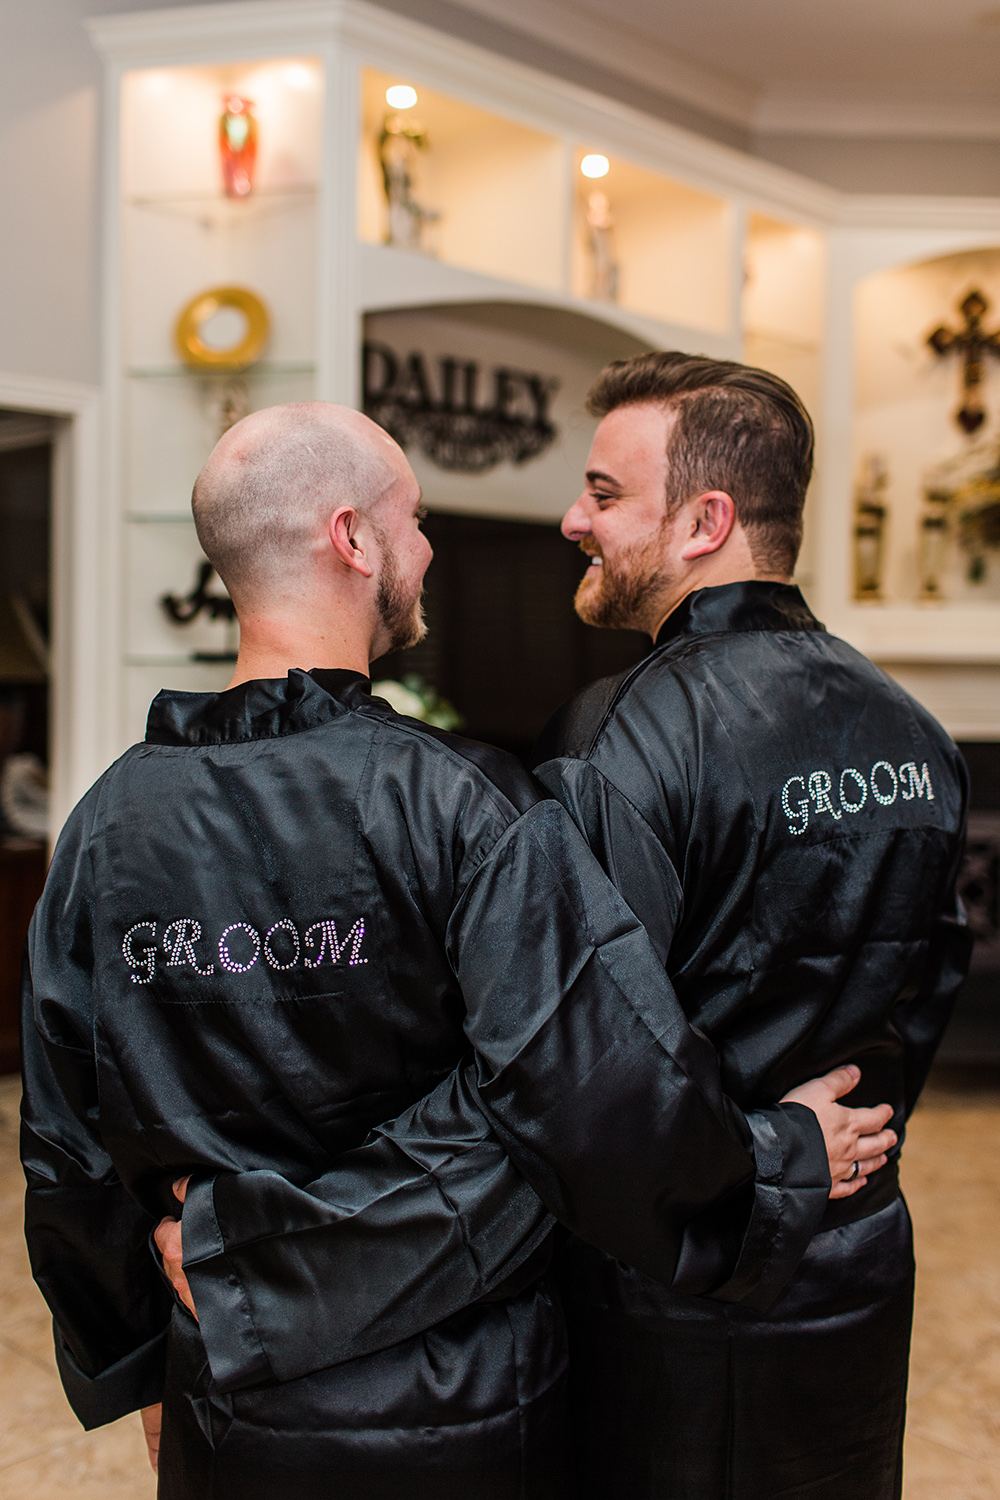 wedding photography - getting ready - groom robes